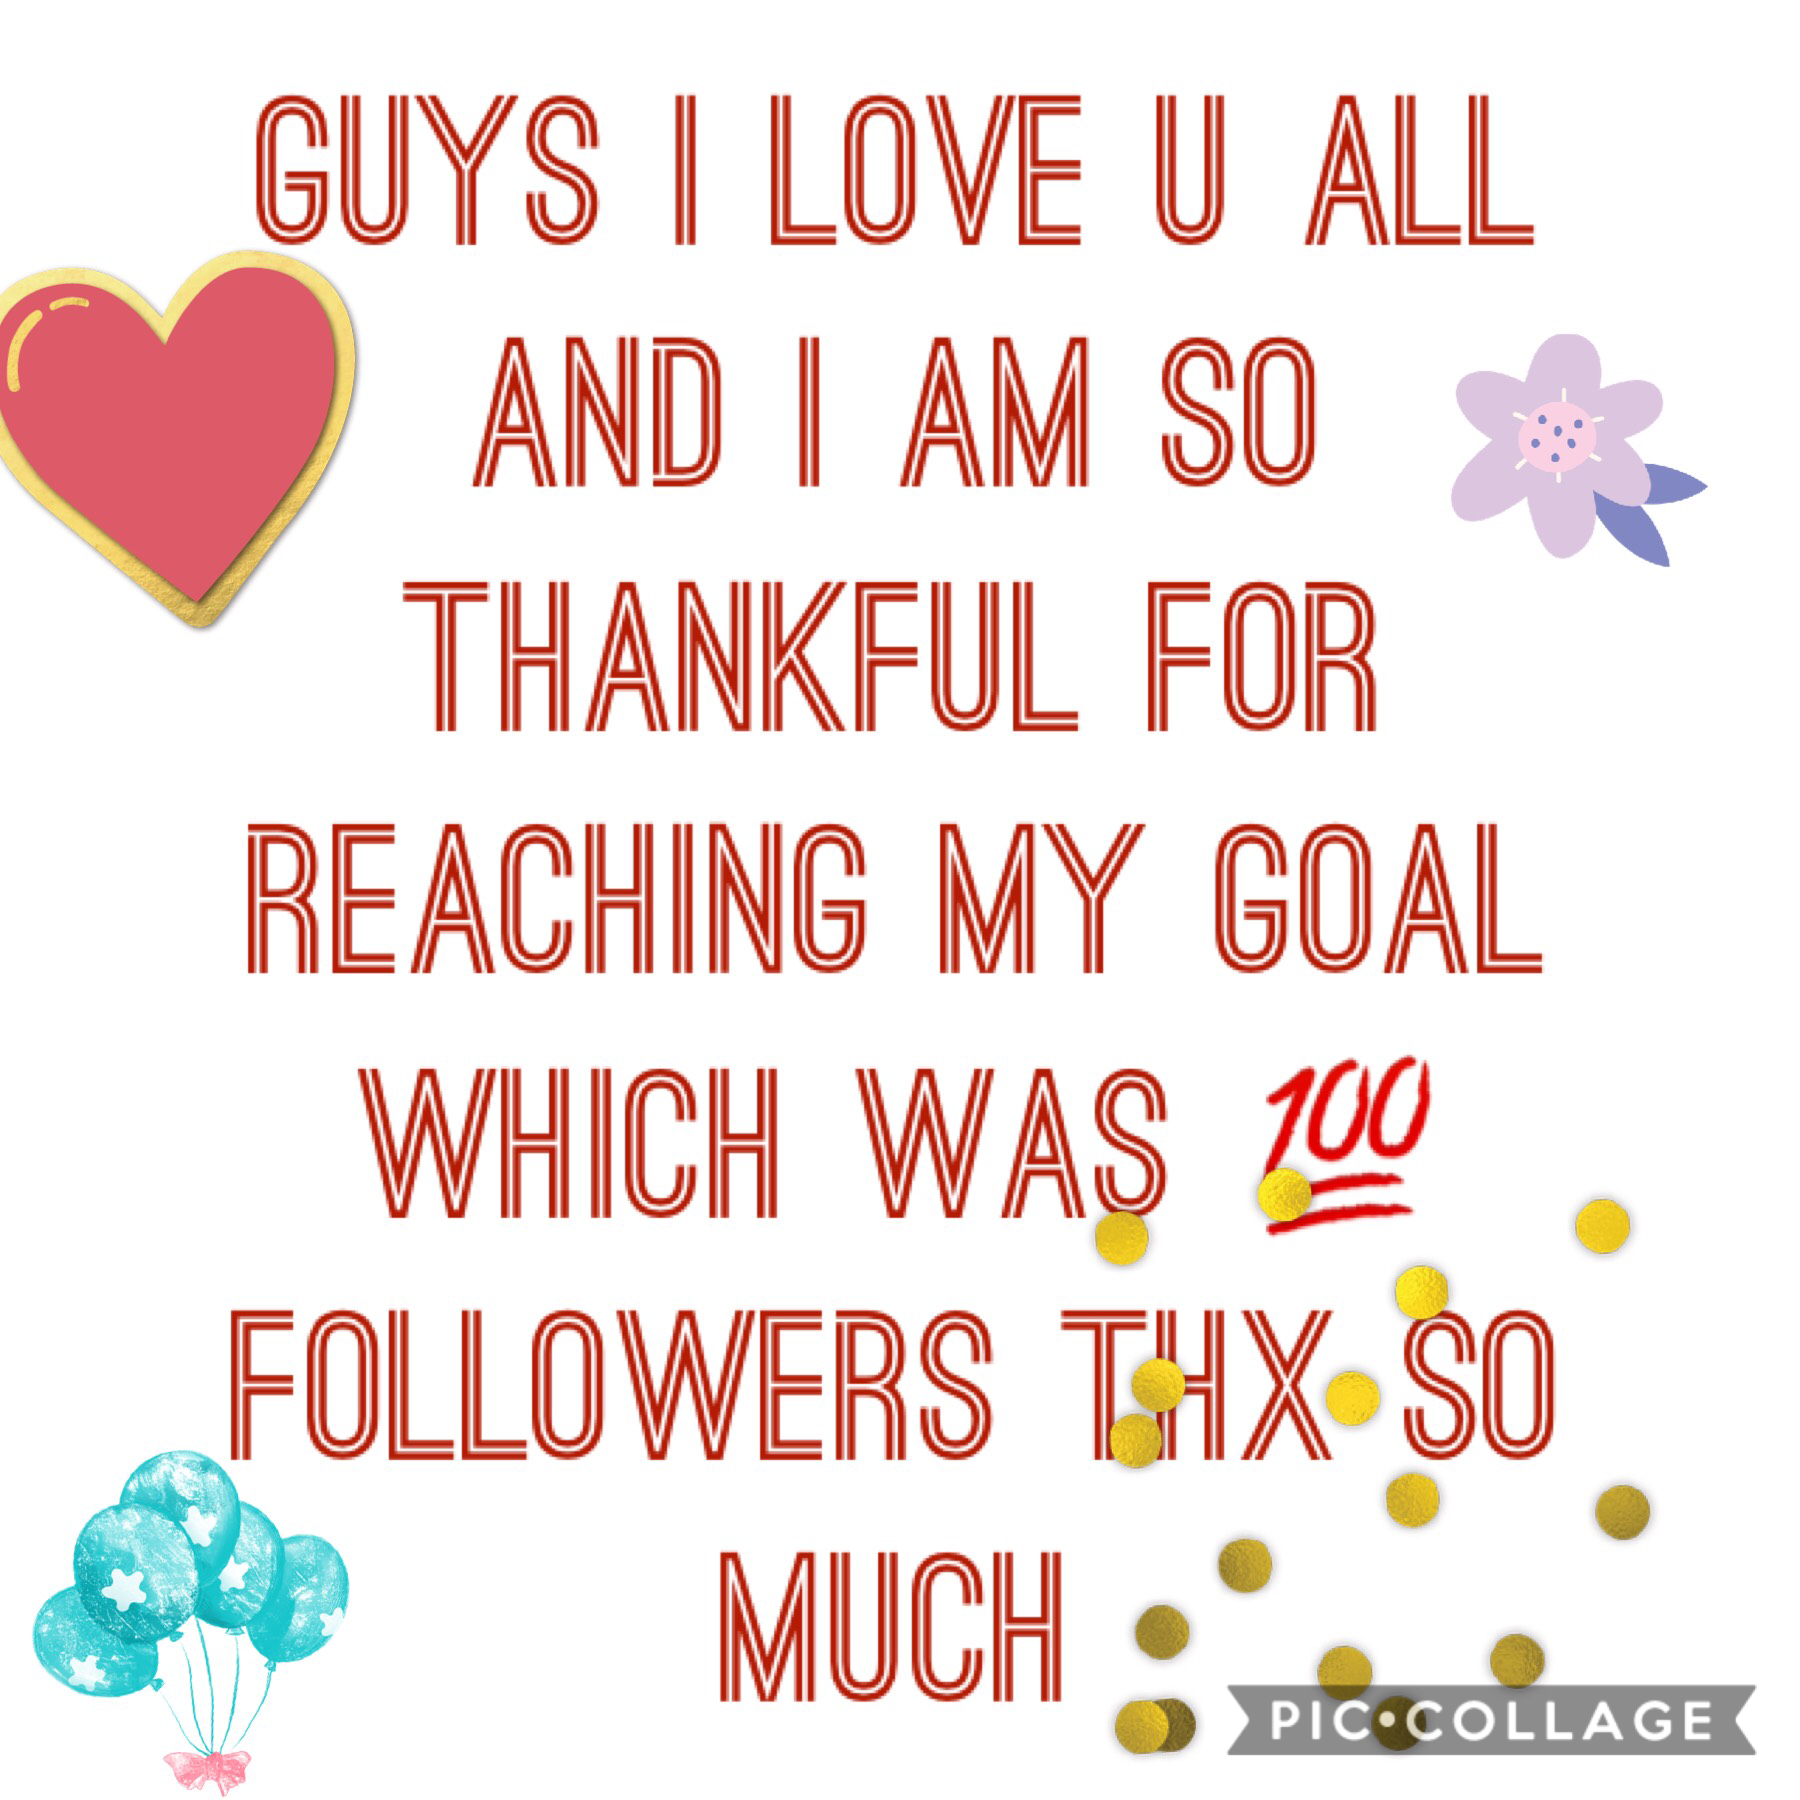 Thx so much our next goal is 200 😇😍🥰